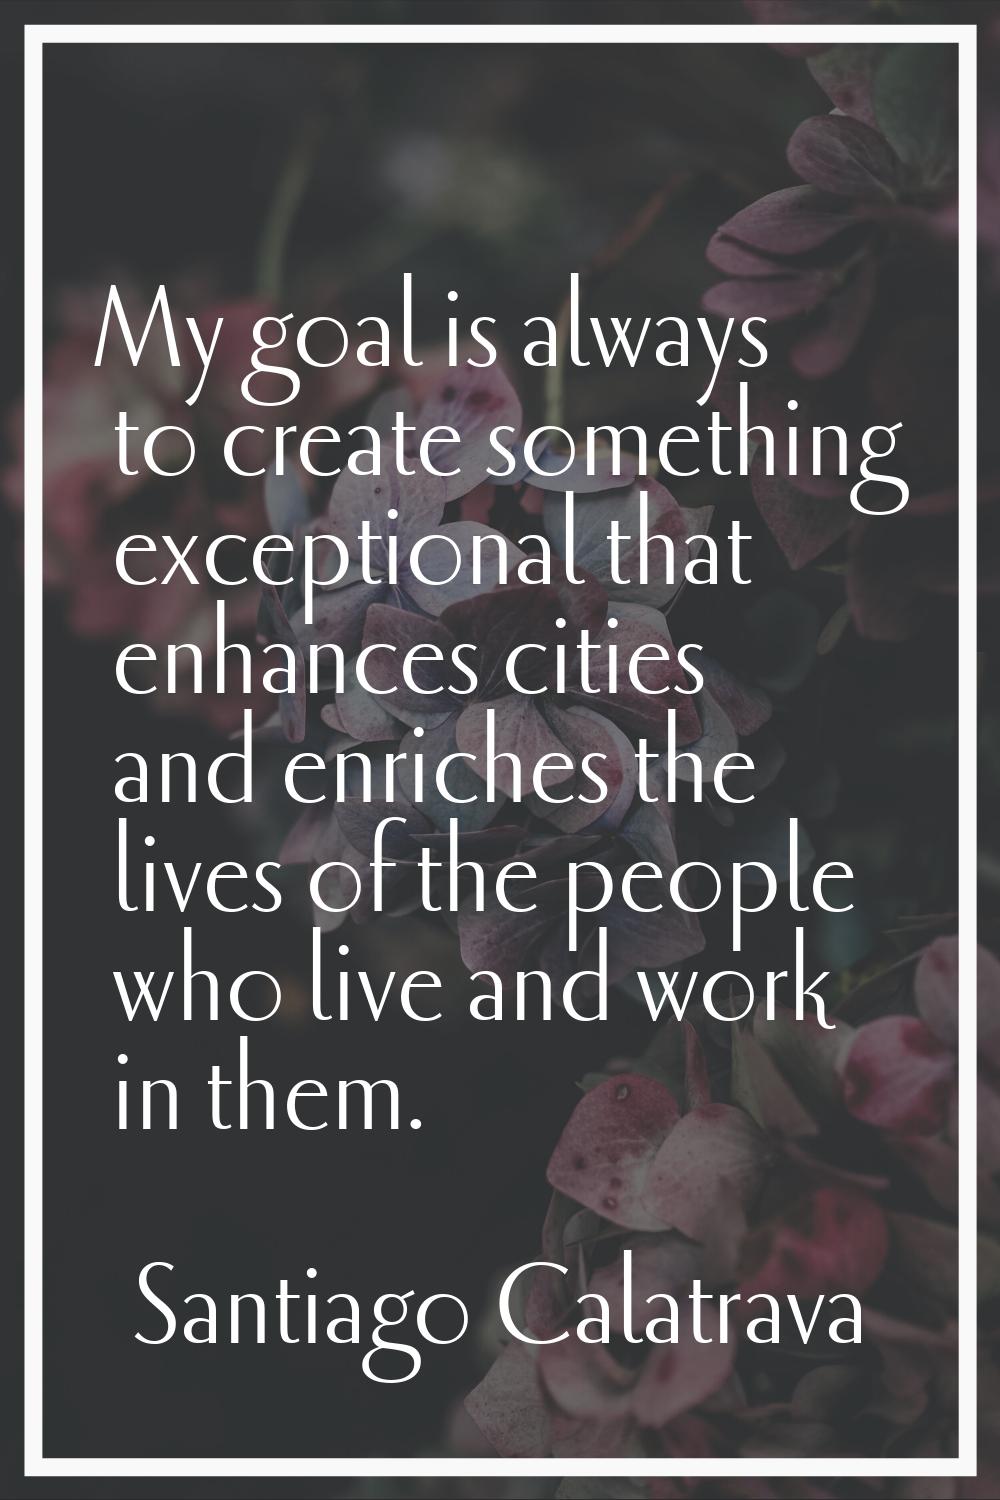 My goal is always to create something exceptional that enhances cities and enriches the lives of th